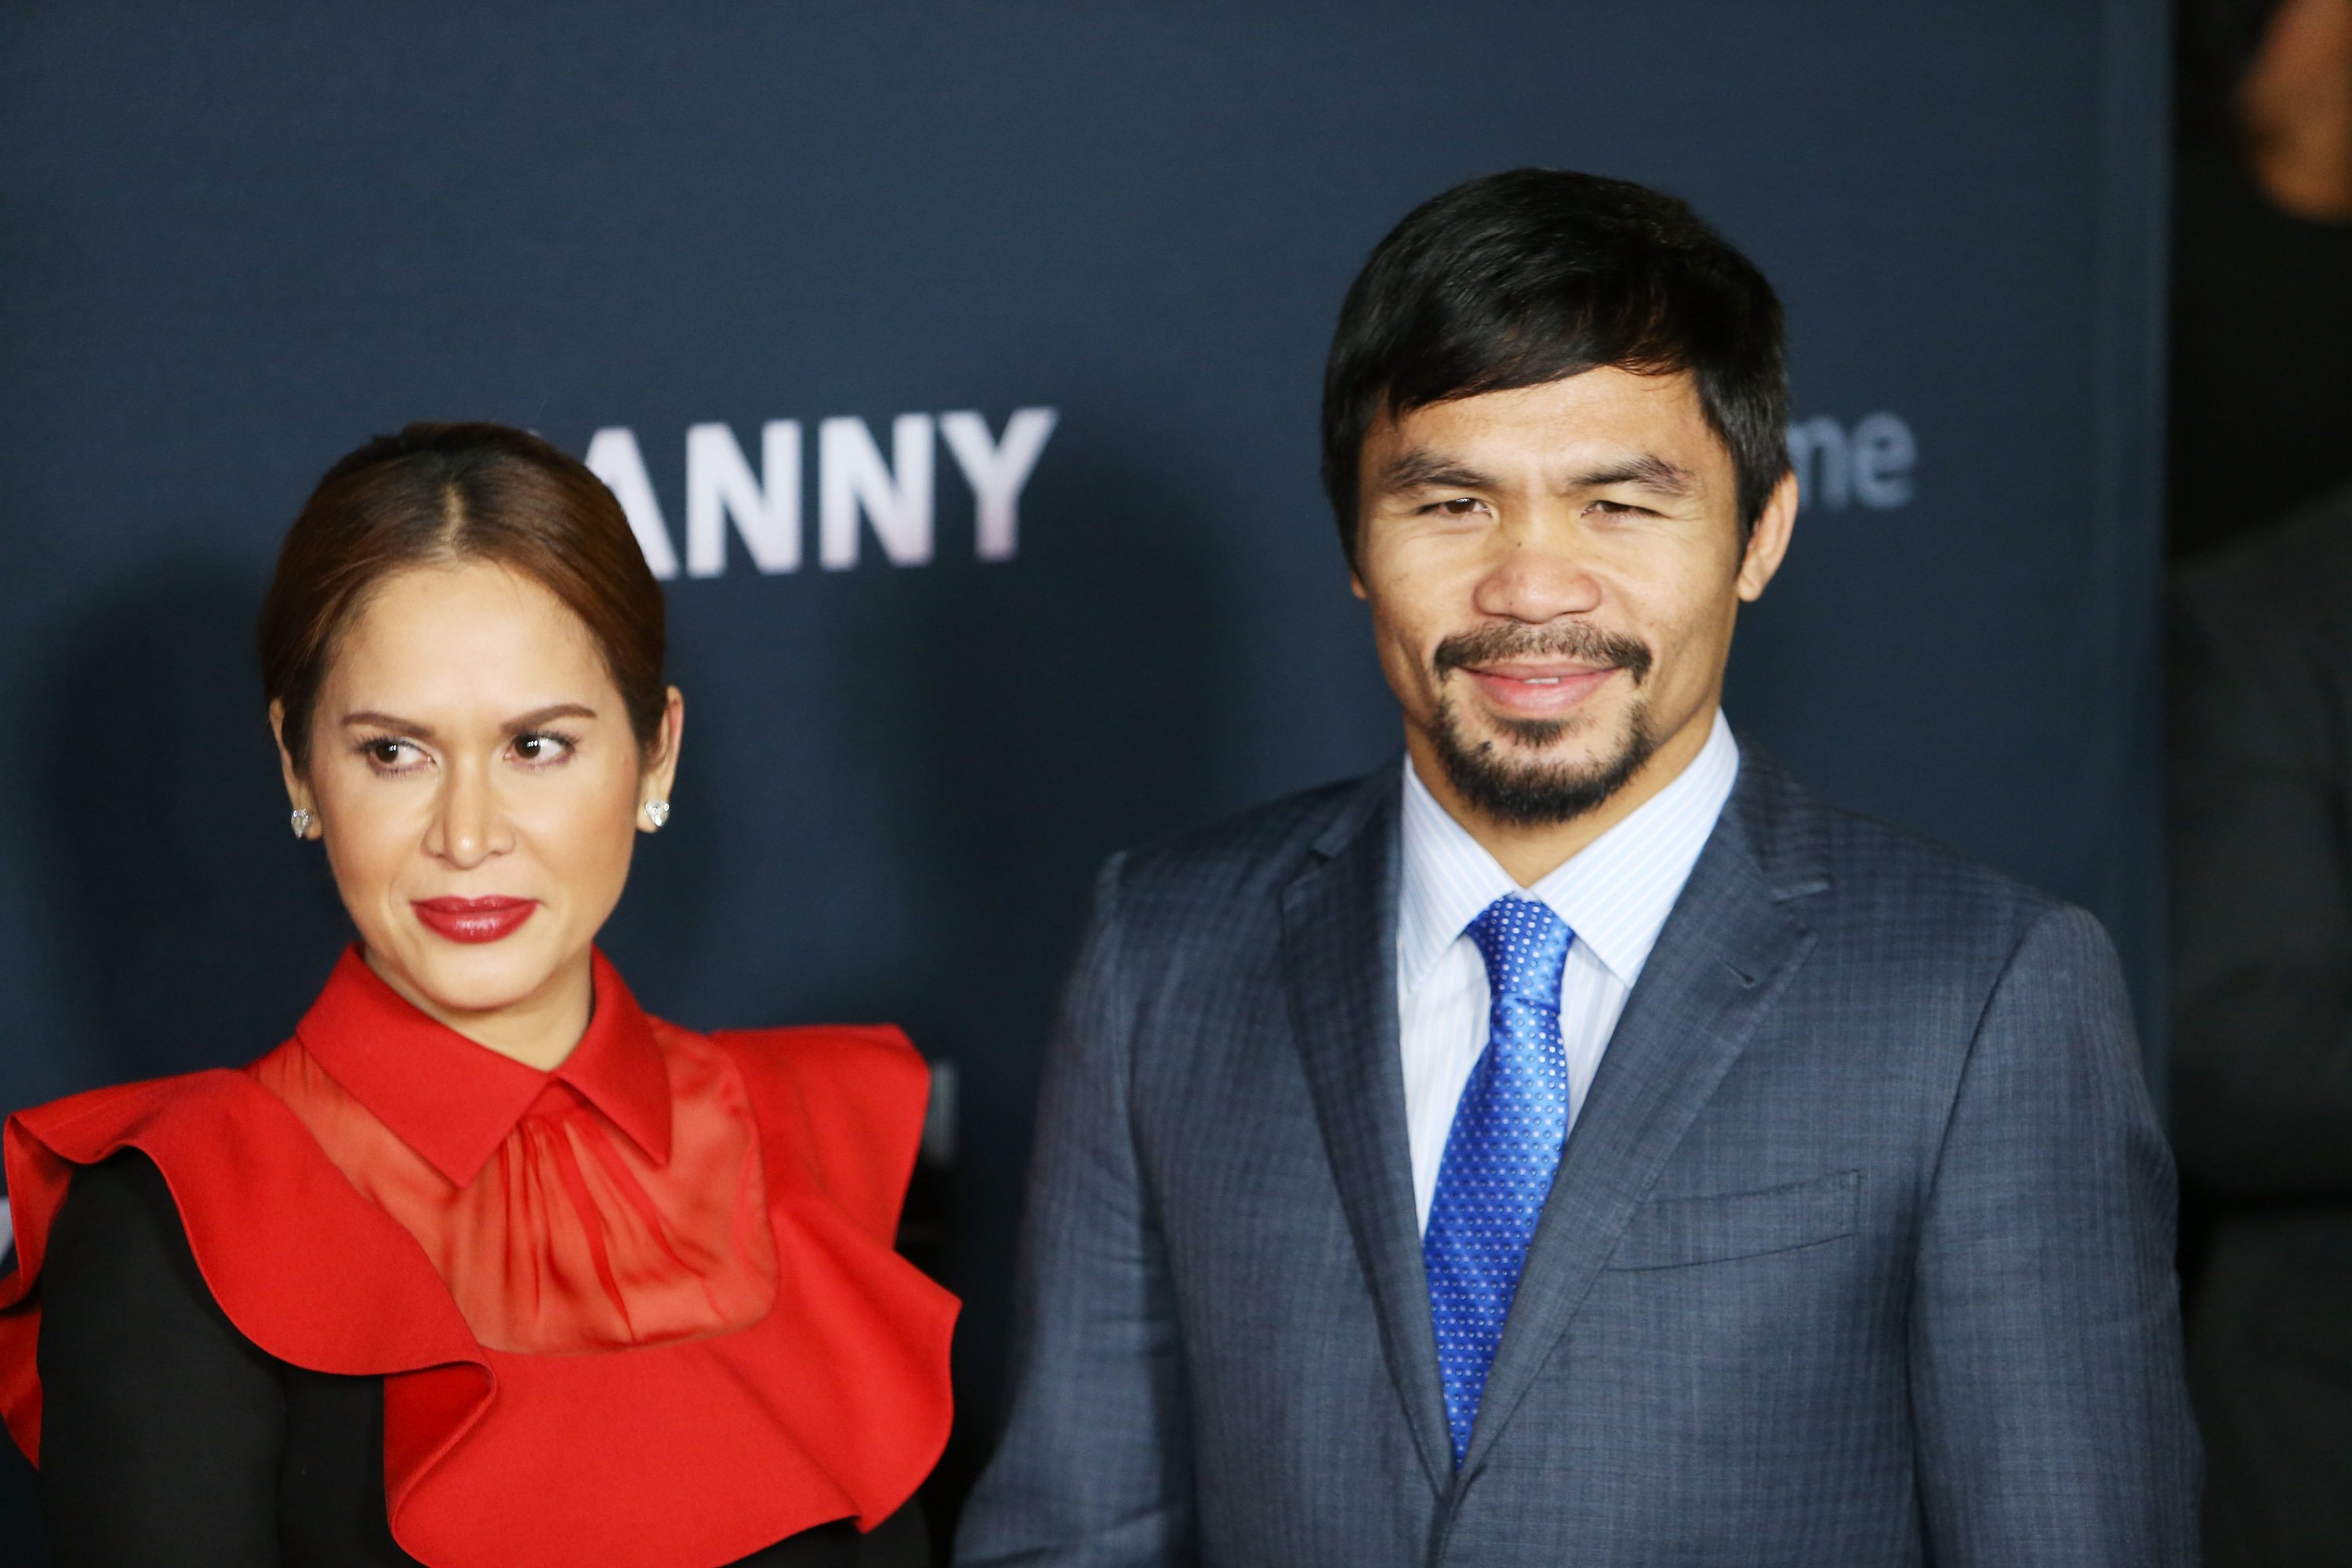  Manny Pacquiao and wife, Maria Geraldine Jamora arrive at the Los Angeles premiere of "Manny" held at TCL Chinese Theatre on January 20, 2015 in Hollywood, California. | Source: Getty Images